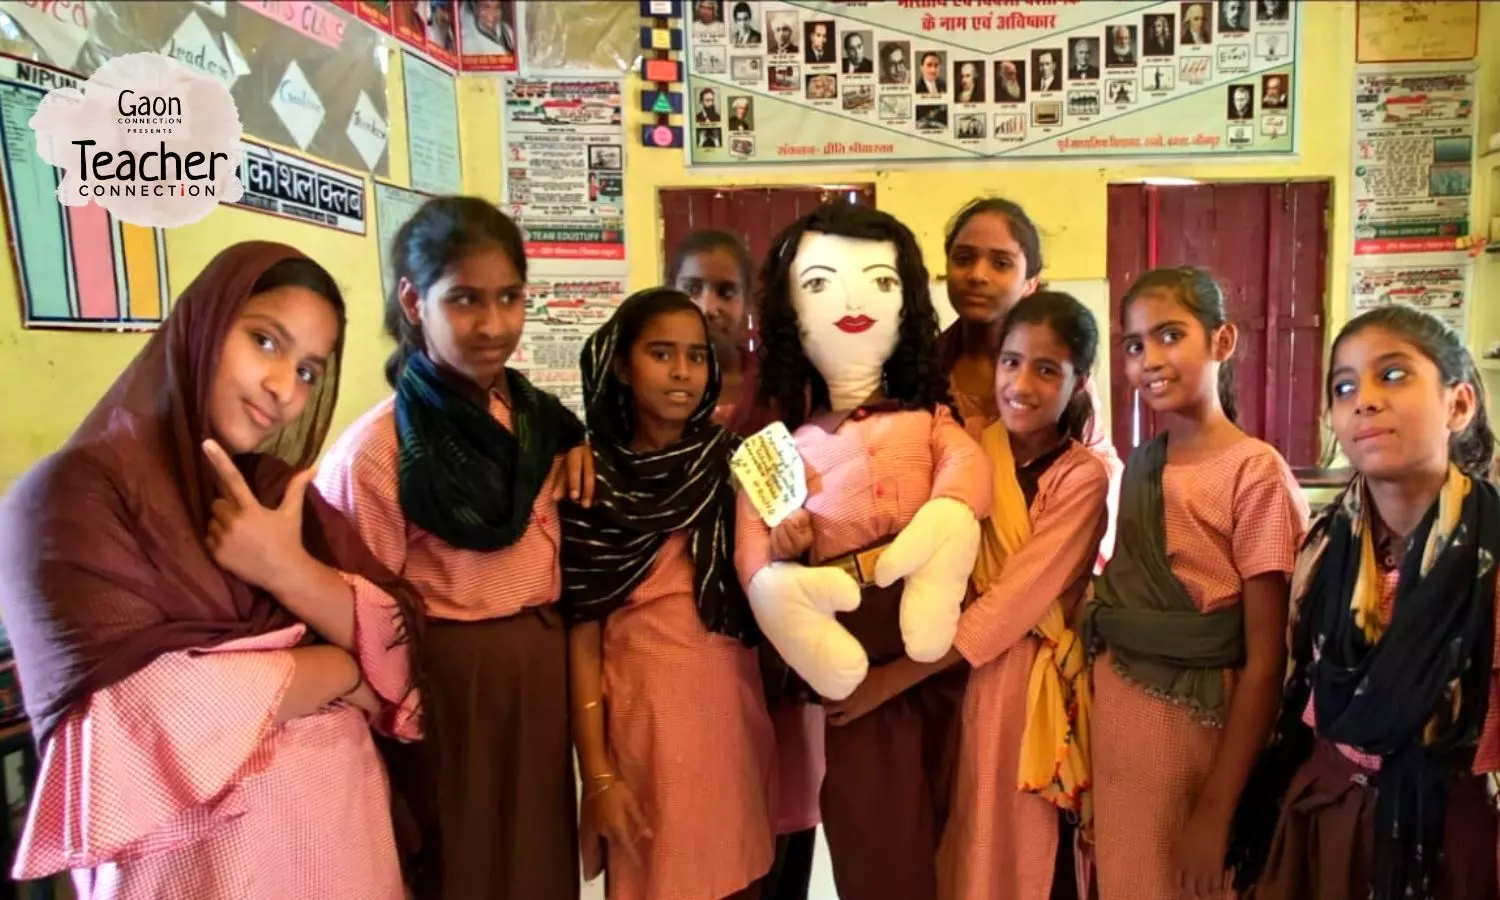 Use Of Bluetooth And Puppets In The Classroom Makes Learning Fun In A Govt School